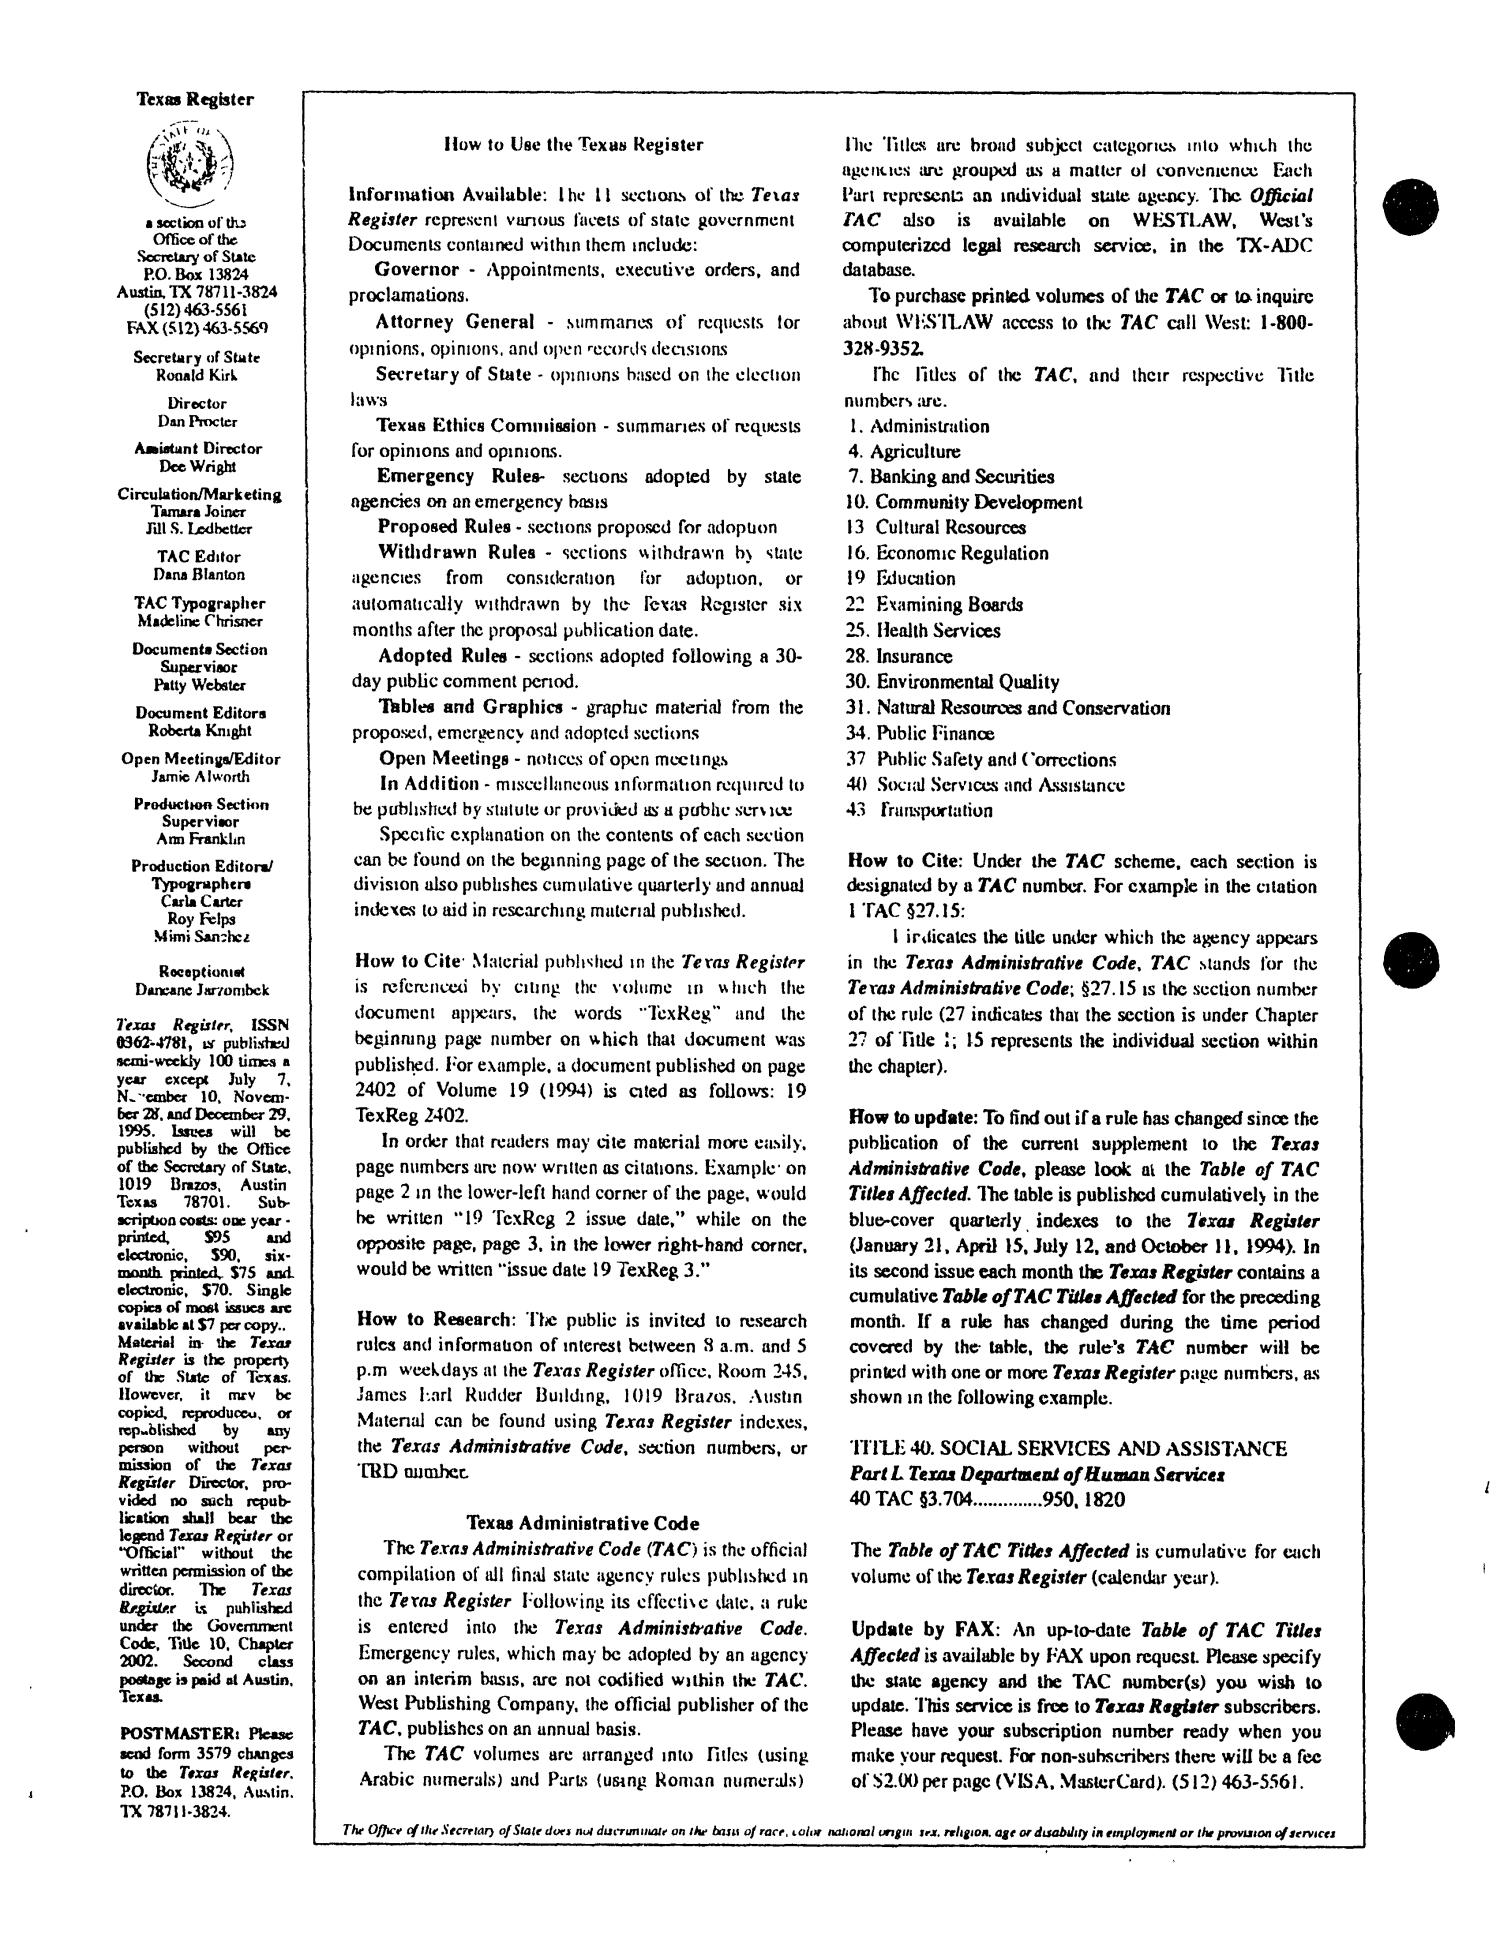 Texas Register, Volume 20, Number 1, Pages 1-46, January 3, 1995
                                                
                                                    None
                                                